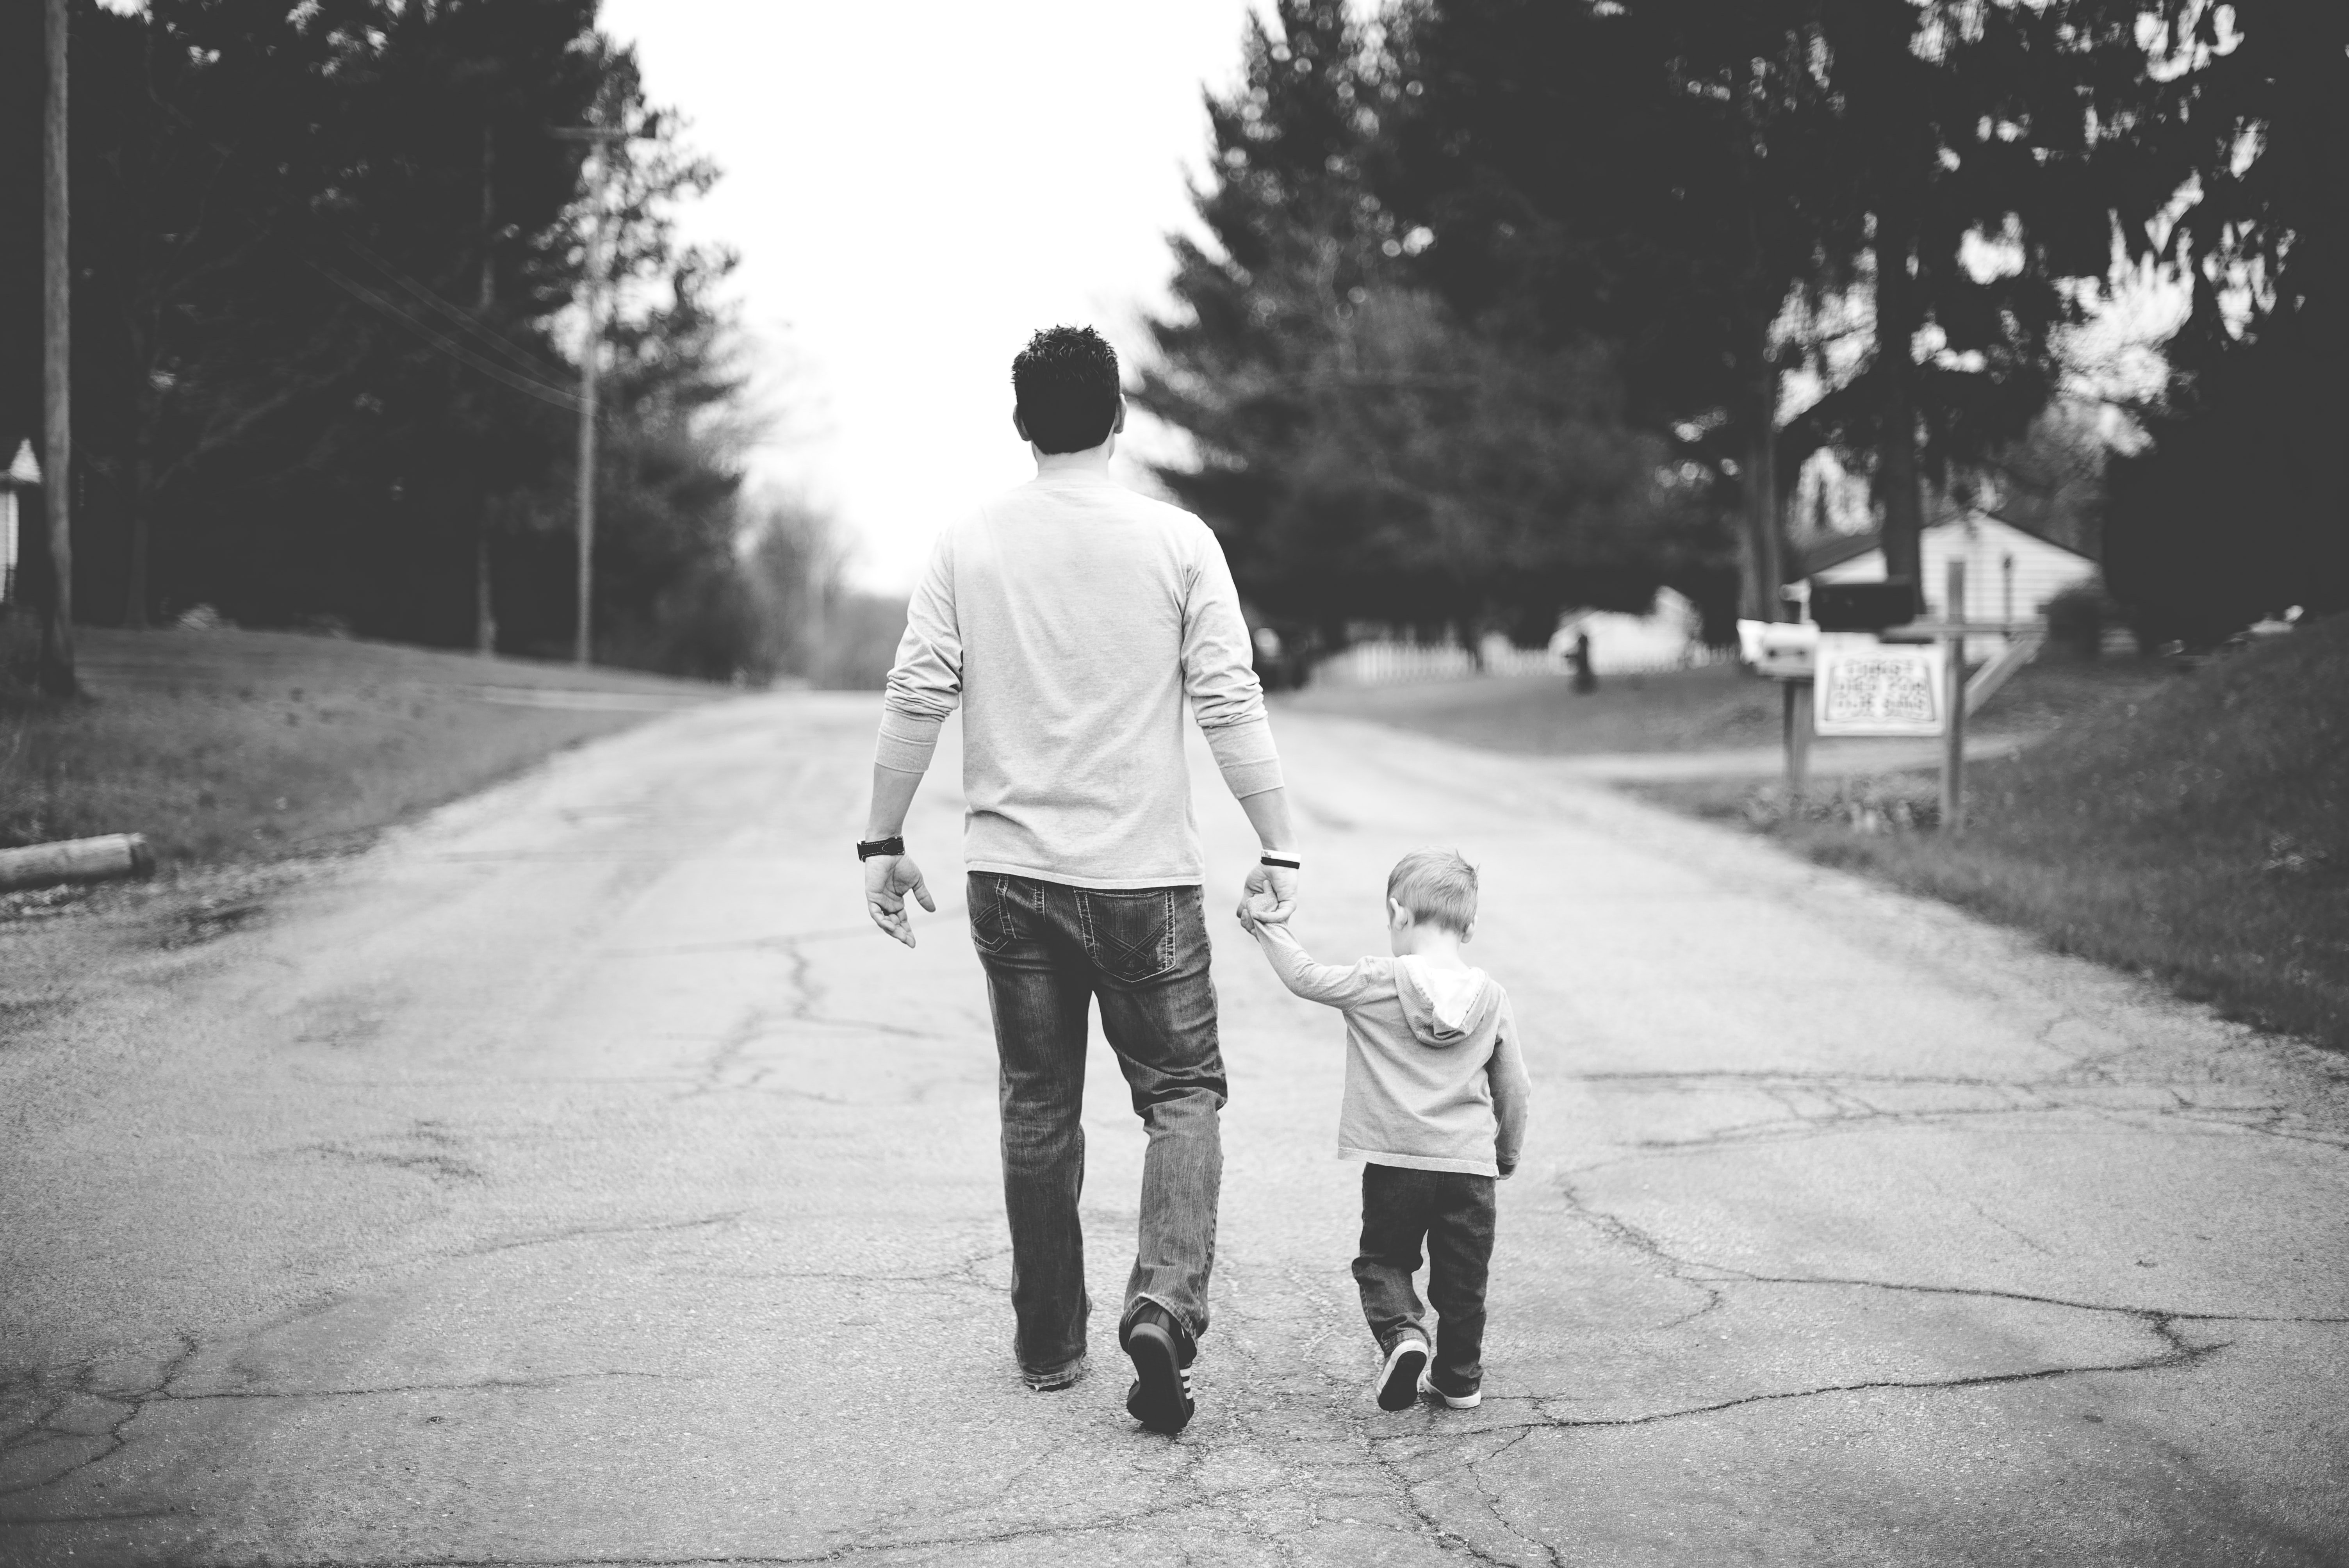 Apart from his issues with his in-laws, the man was focused on getting Zach back to health. | Source: Unsplash